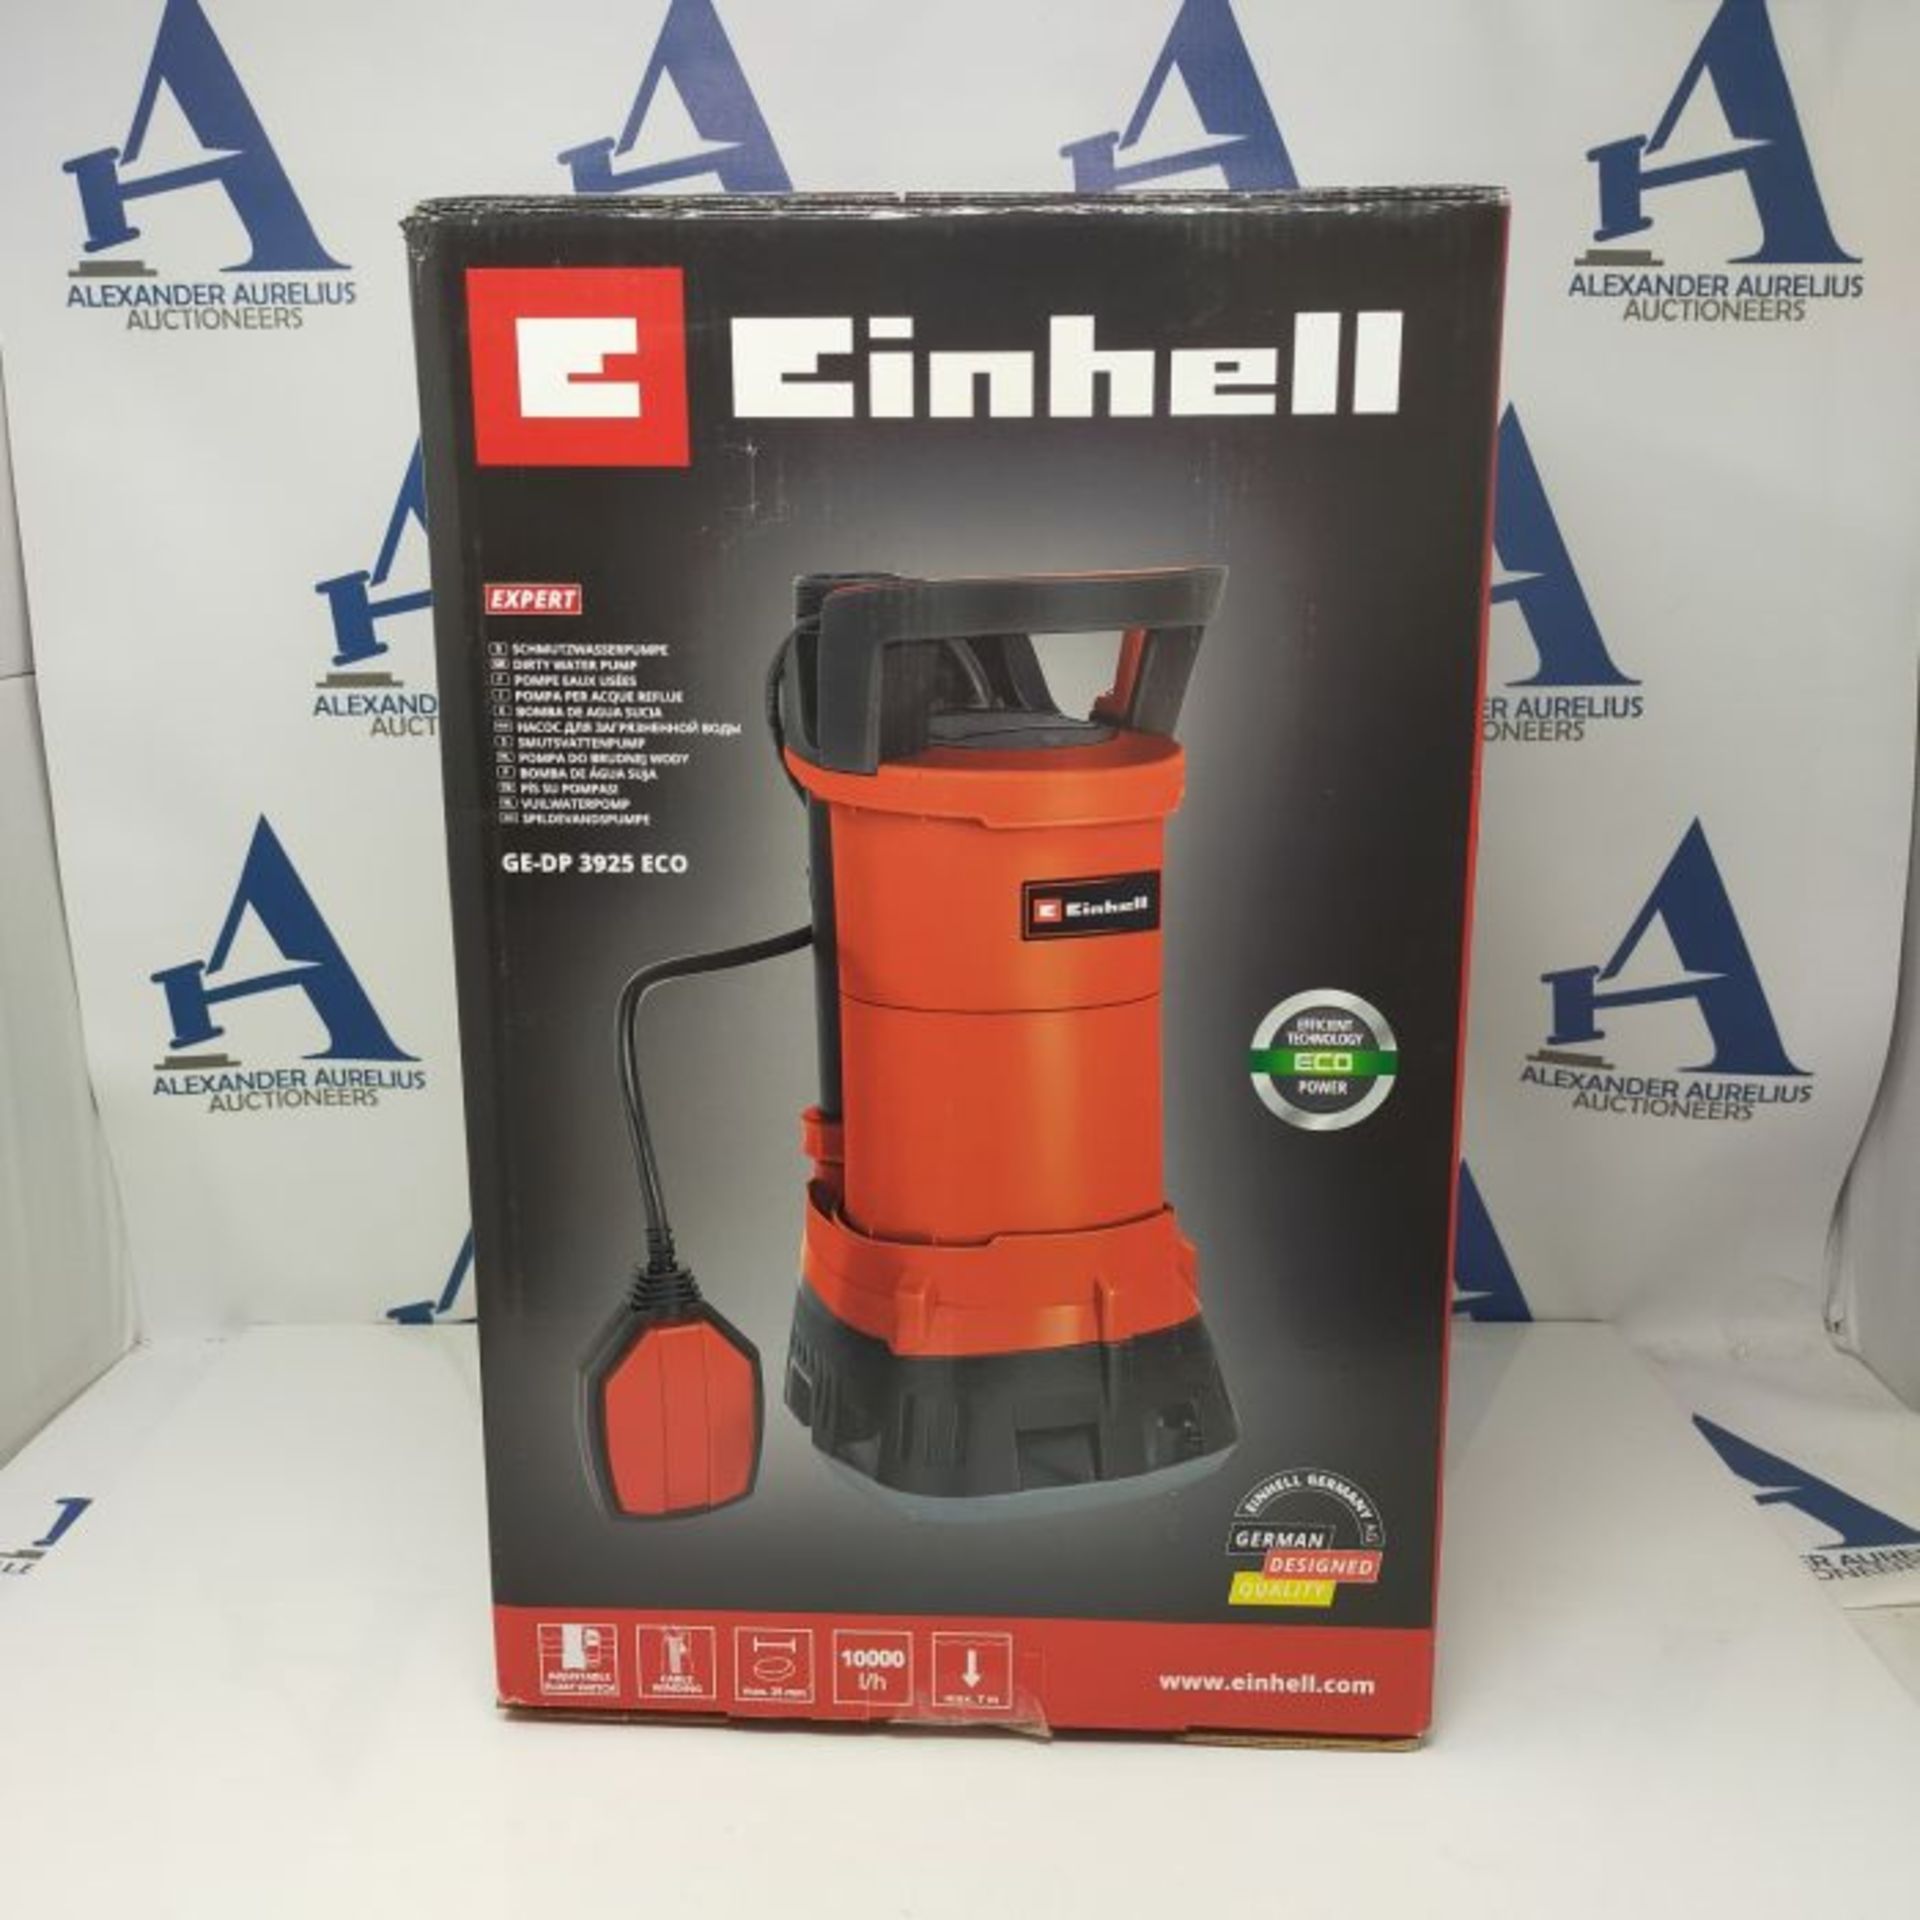 RRP £56.00 Einhell GE-DP 3925 ECO - Image 3 of 3